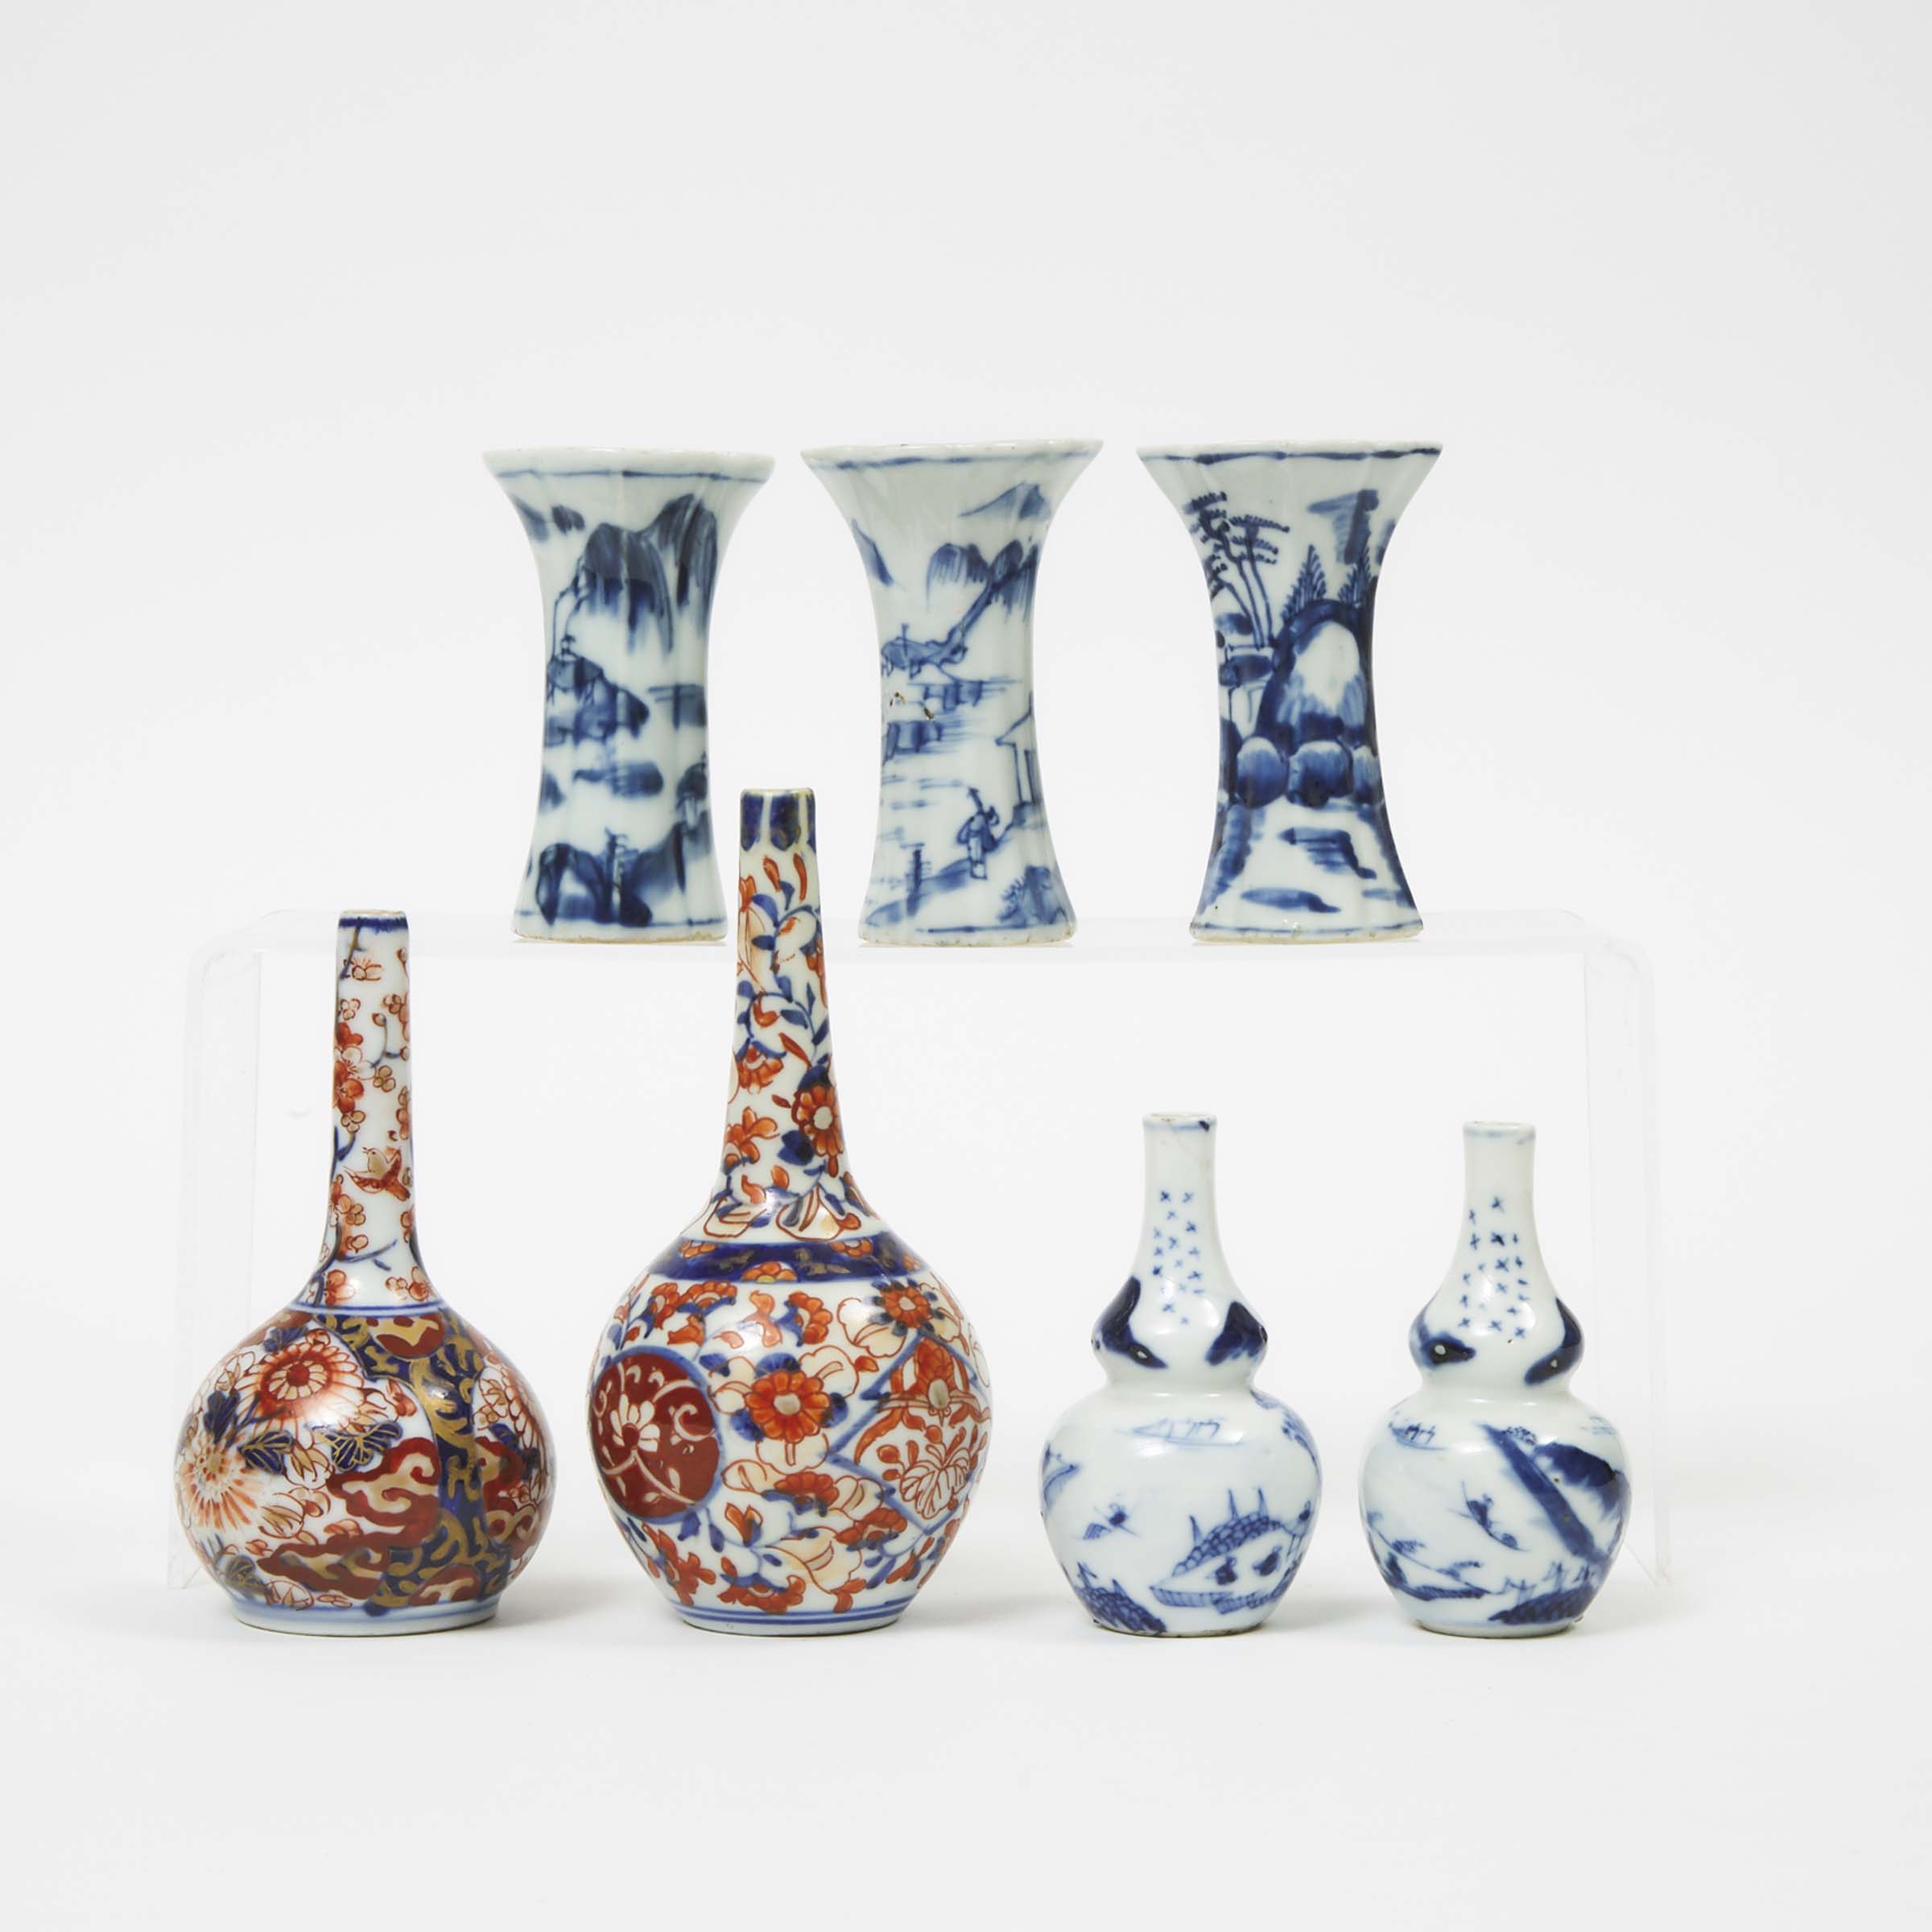 A Chinese Blue and White Five-Piece Miniature Garniture, together with Two Imari Bottle Vases, 18th/19th Century